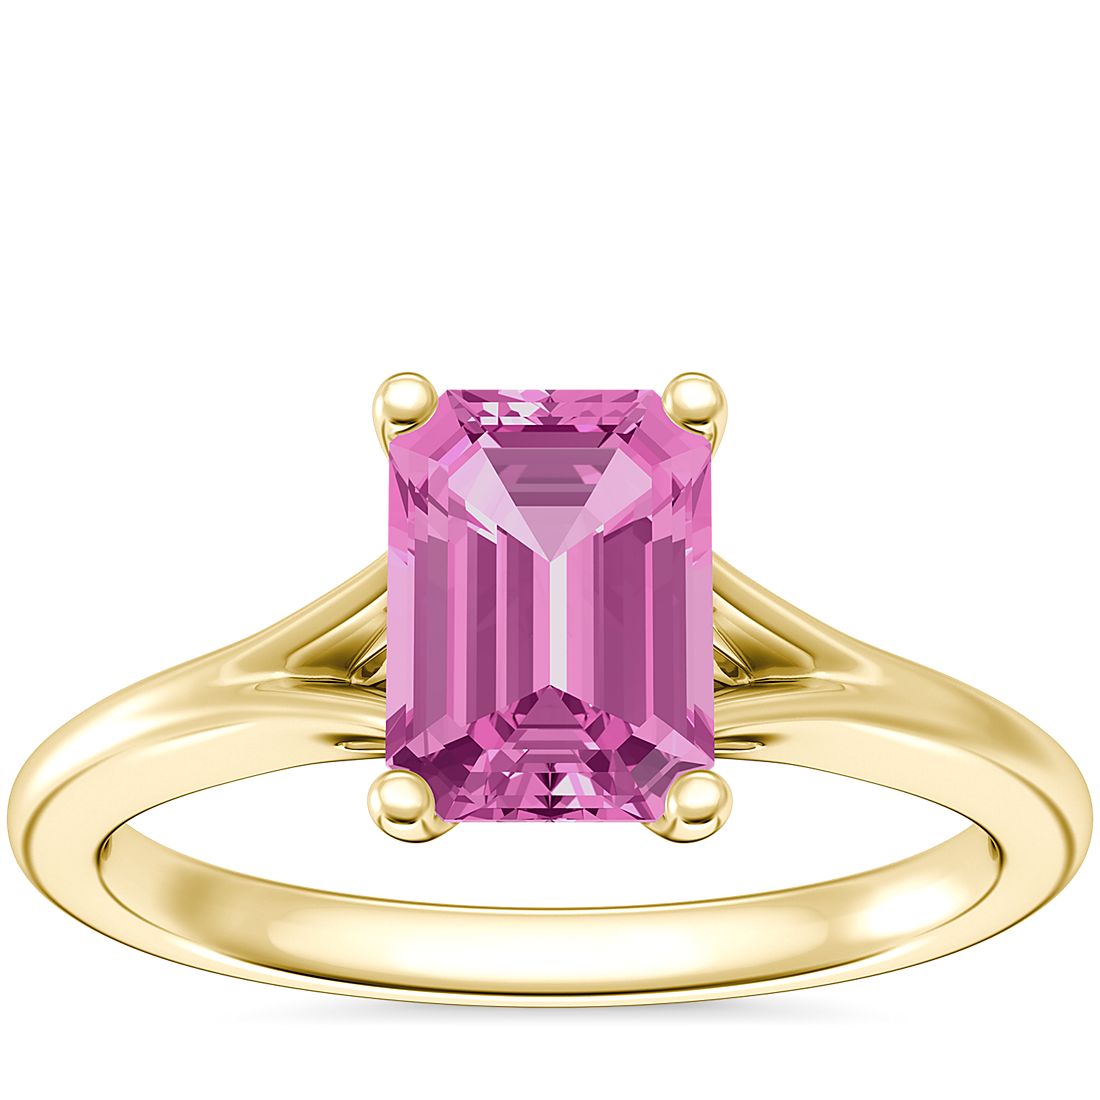 Petite Split Shank Solitaire Engagement Ring with Emerald-Cut Pink Sapphire in 18k Yellow Gold (7x5mm)